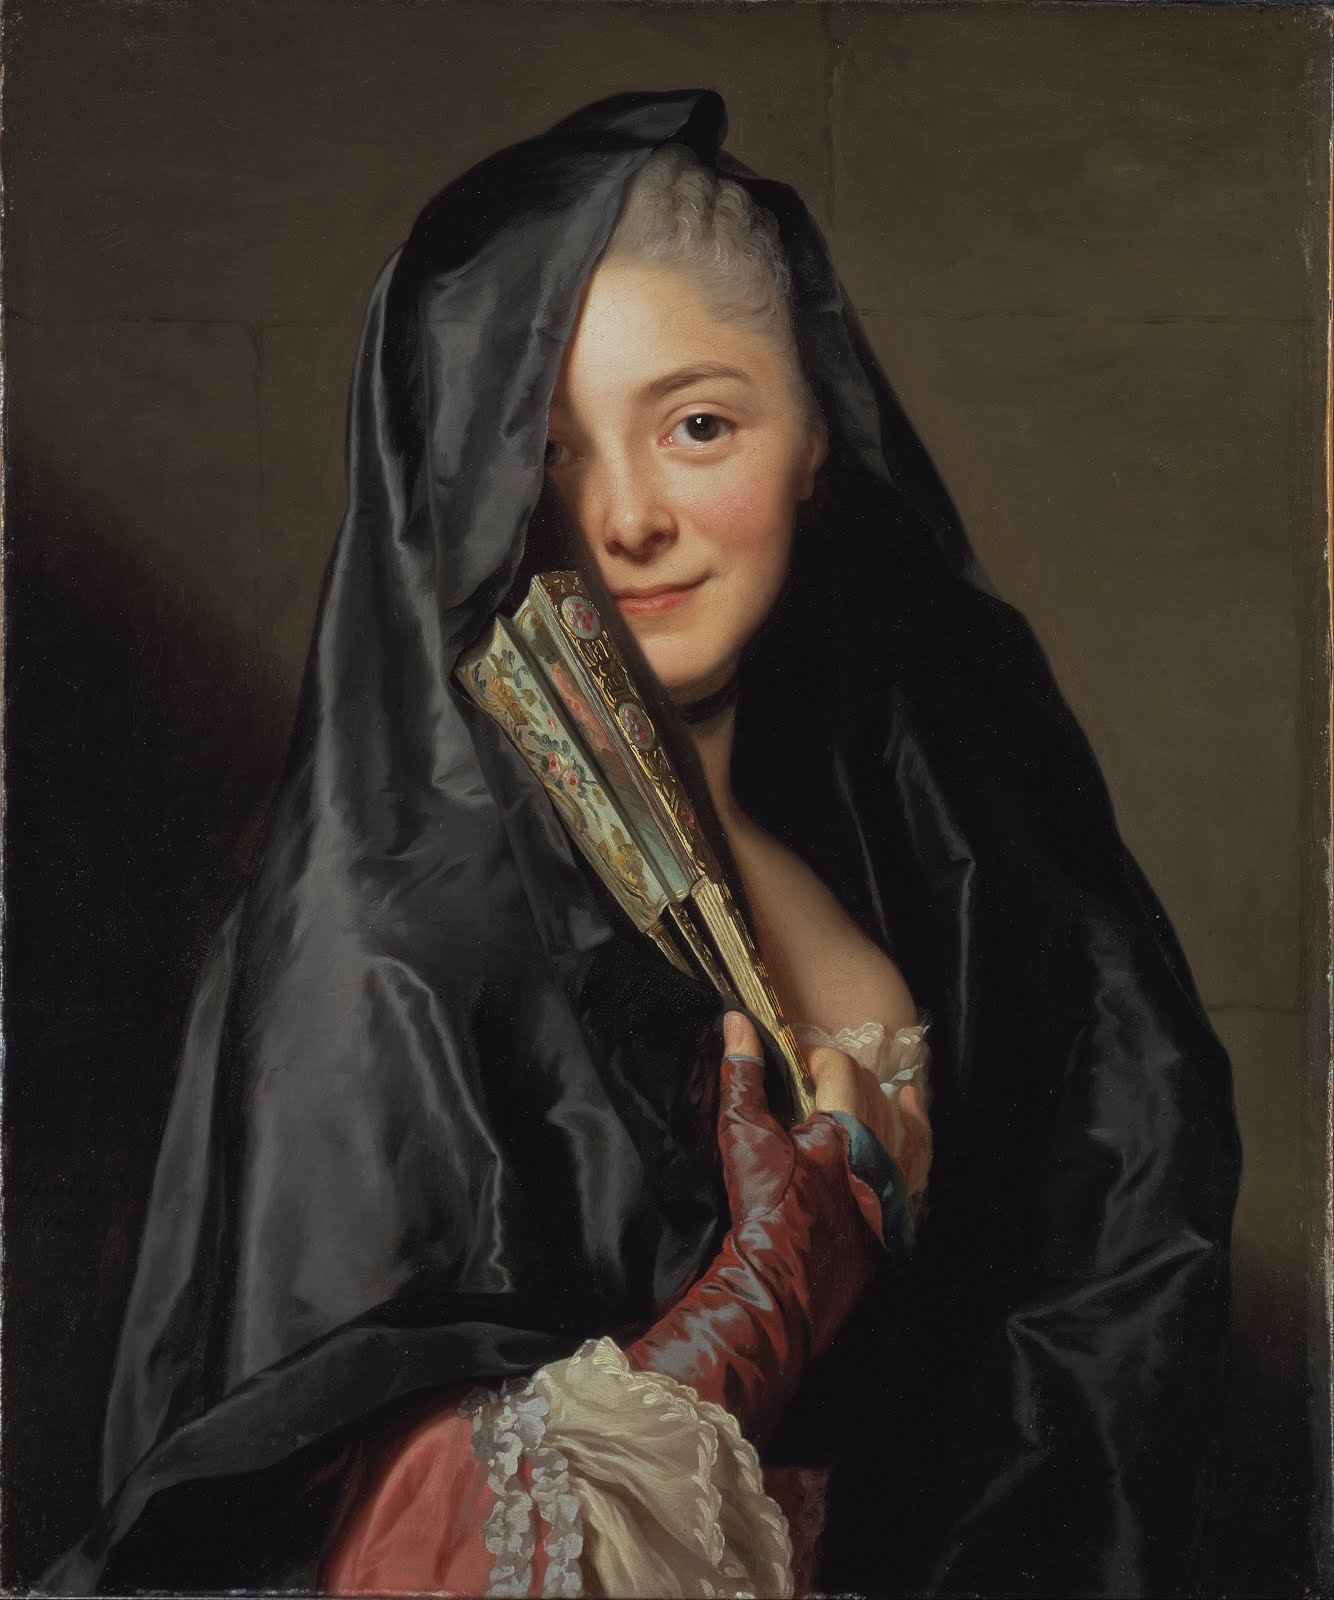 The Lady with the veil